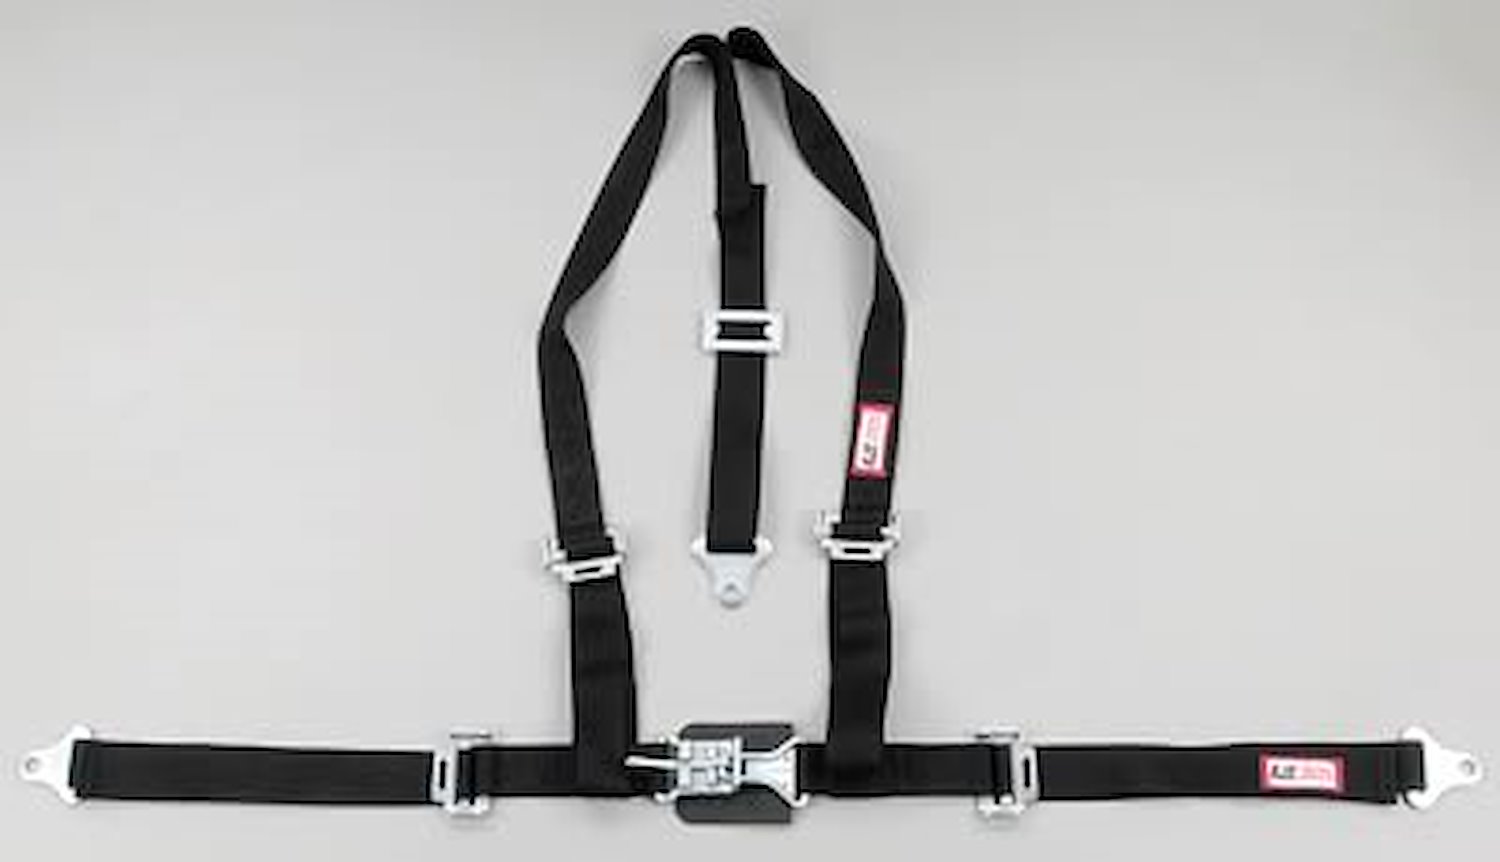 NON-SFI L&L HARNESS 2 PULL UP Lap Belt SEWN IN 2 S.H. V ROLL BAR Mount w/STERNUM STRAP ALL WRAP ENDS ORANGE